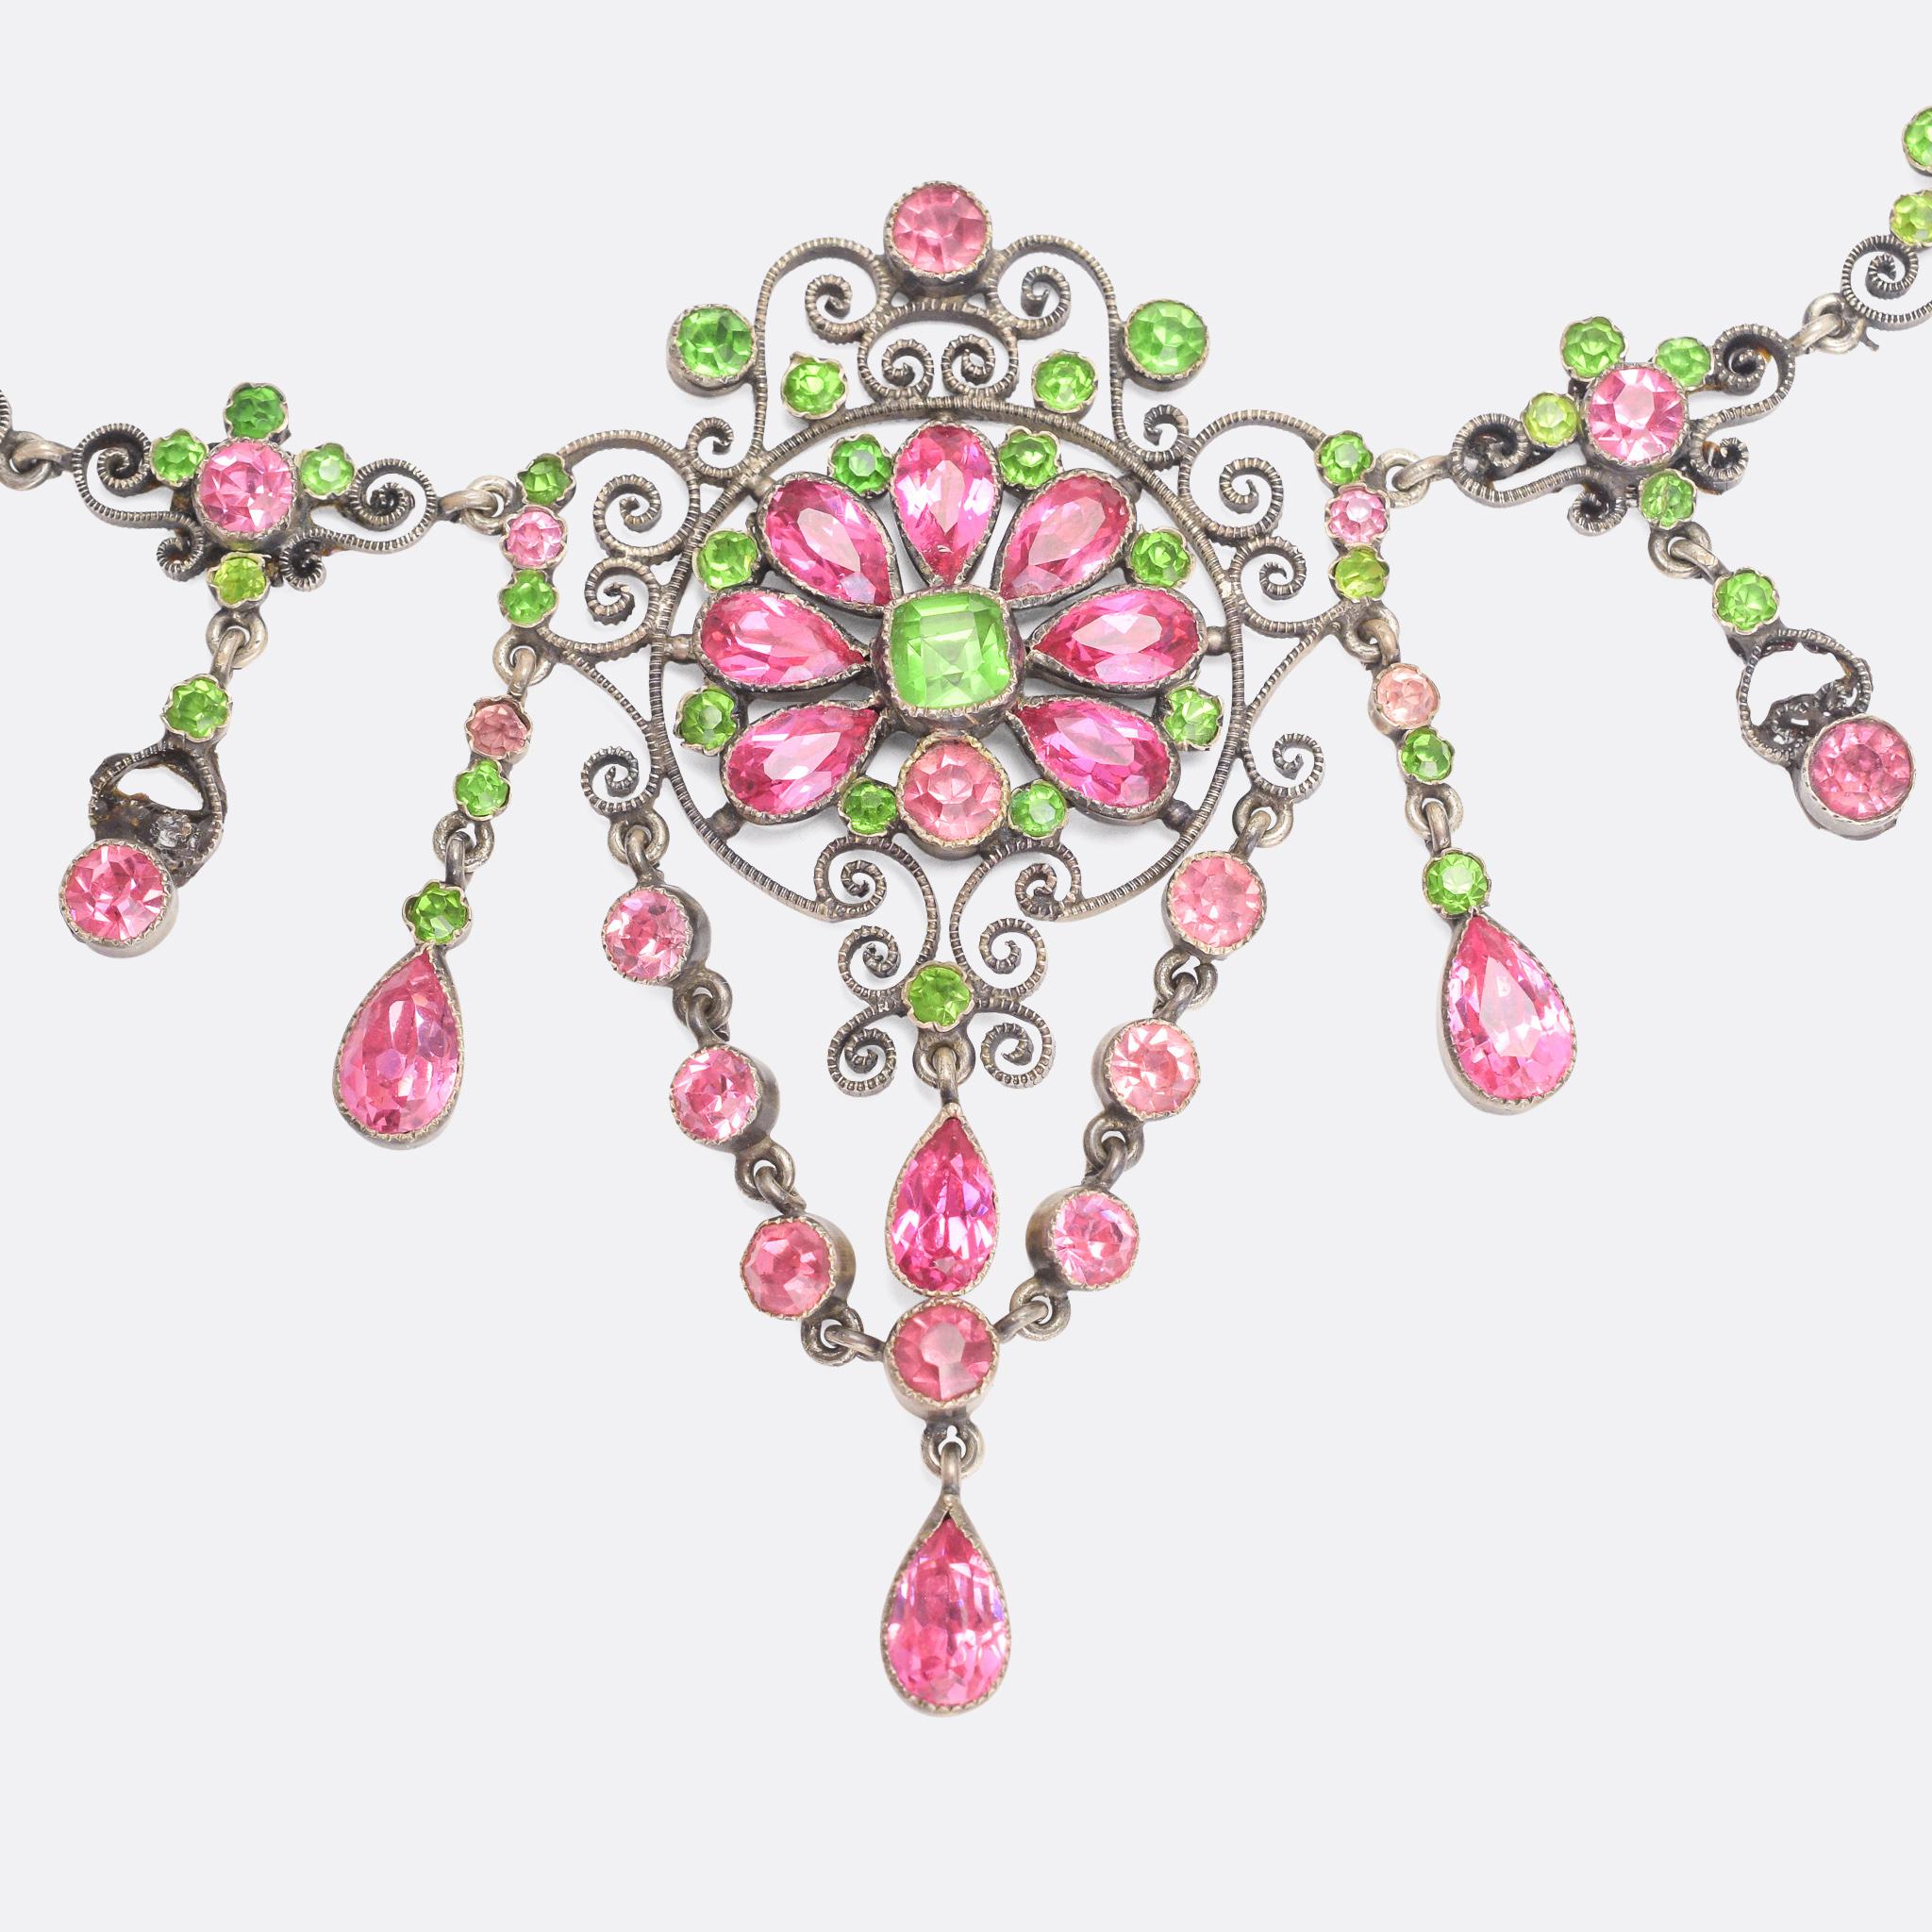 A spectacular mid Victorian Austro-Hungarian necklace and brooch suite set with vibrant green and pink paste stones. It's modelled in Silver, and features beautiful scrolled filigree openwork as well as articulated gemset drops. The stones rest in